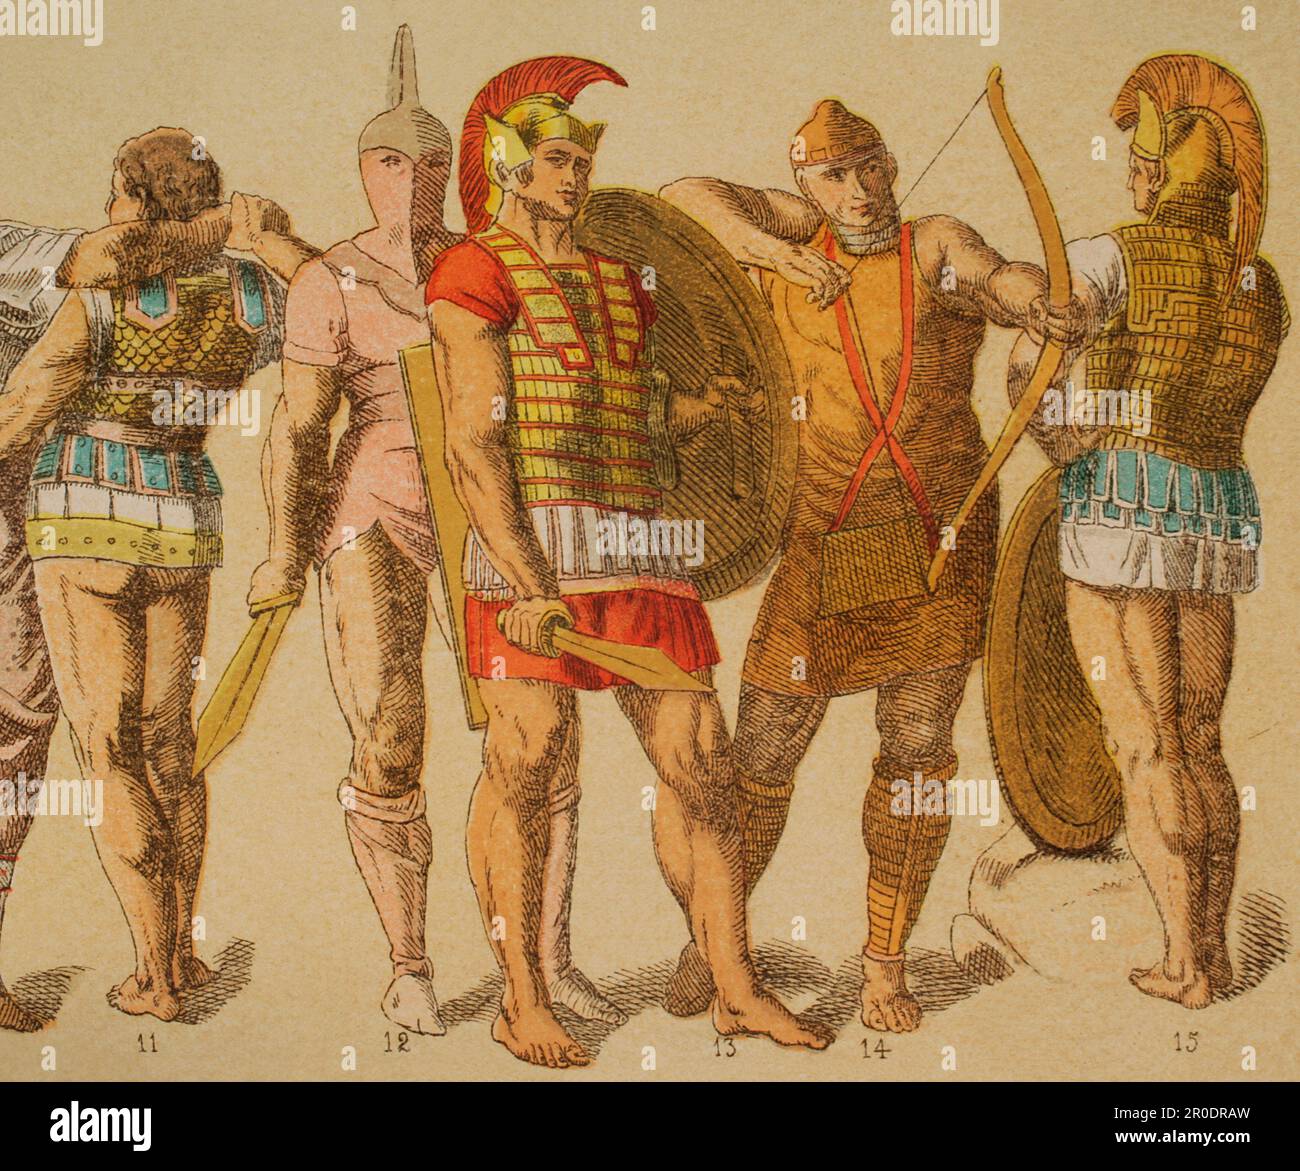 Etruscans. From left to right: 11,12 and 13- Etruscan armour, 14- leather garments with bronze shield, 15- Etruscan armour. Chromolithography. 'Historia Universal', by César Cantú. Volume II, 1881. Stock Photo